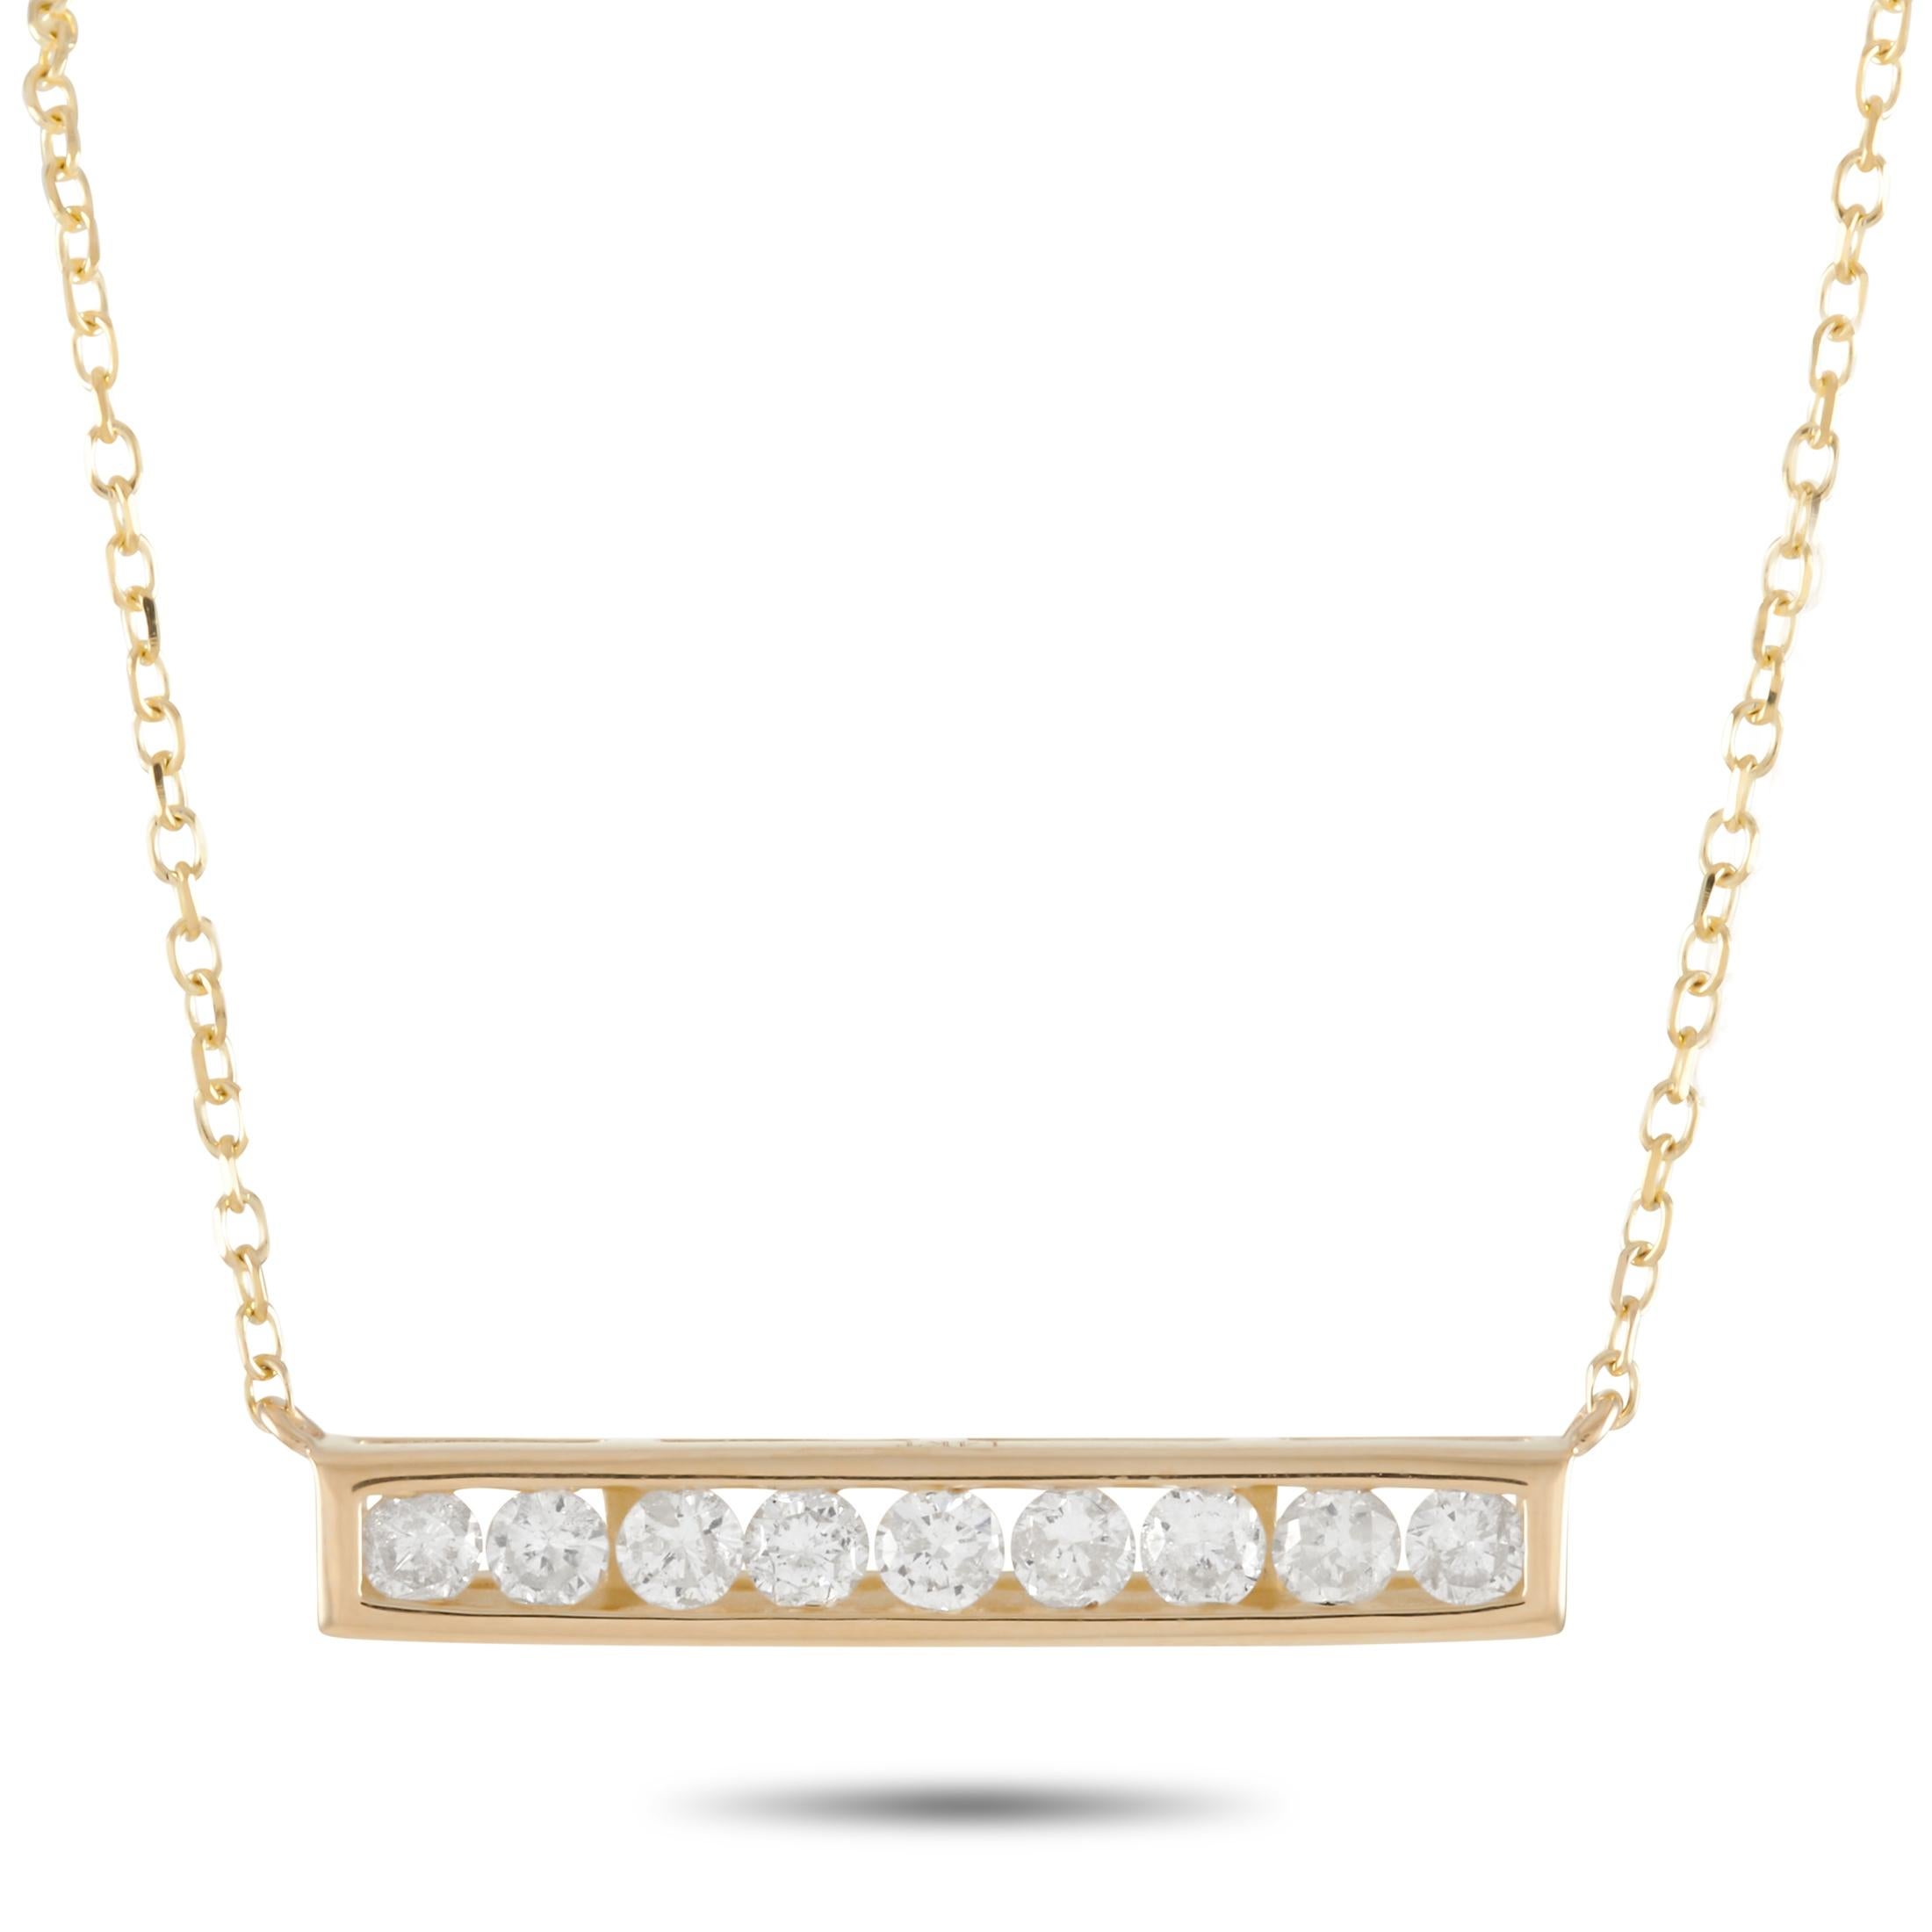 LB Exclusive 14k Yellow Gold 0.25 Carat Diamond Bar Necklace For Sale